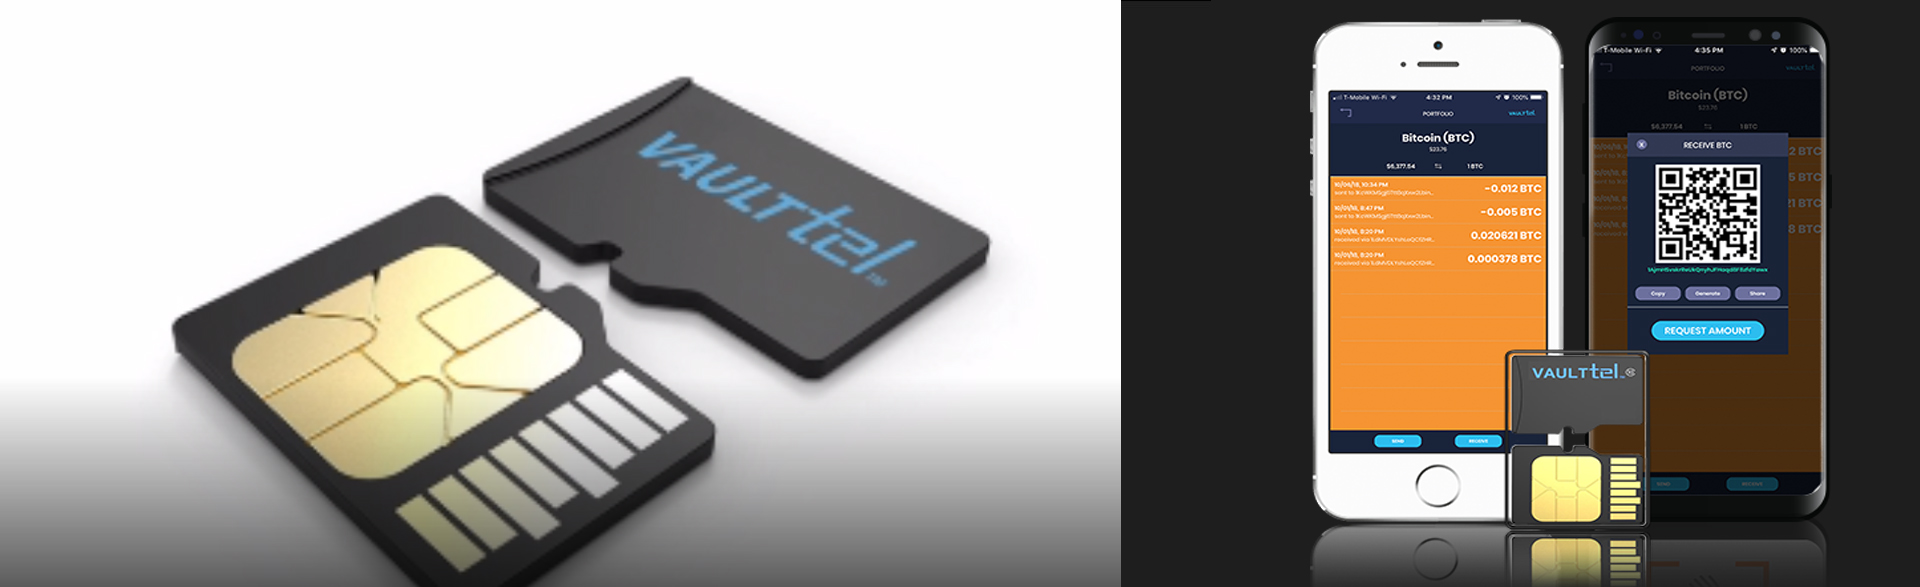 This New Hardware Wallet Fits Into a Smartphone SIM Tray